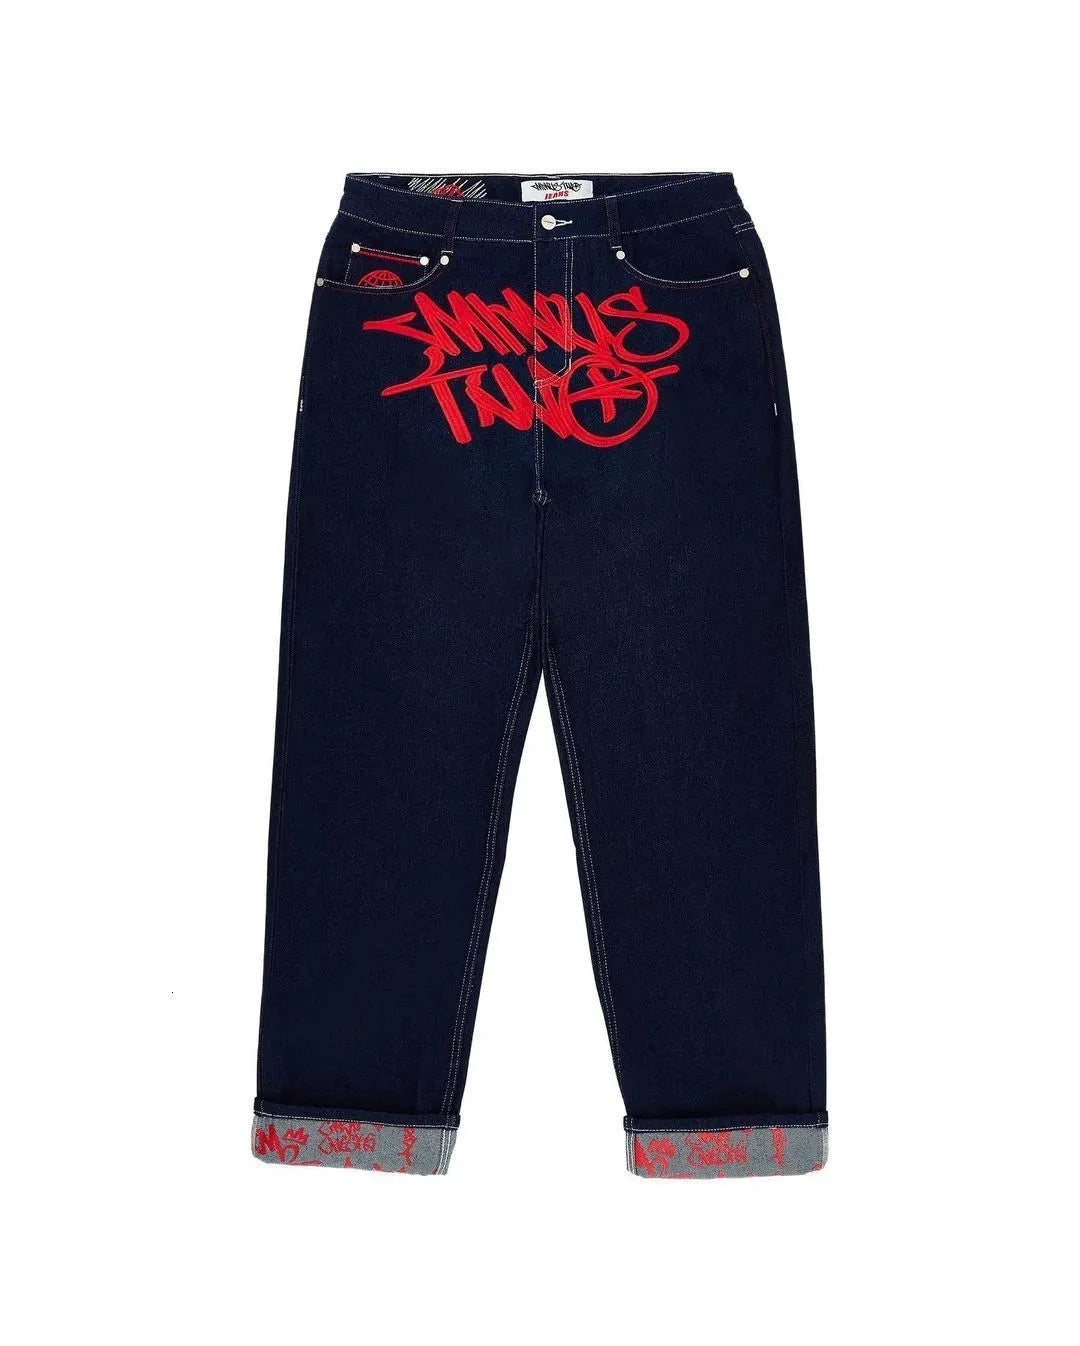 Minus Two Graff Red Jeans